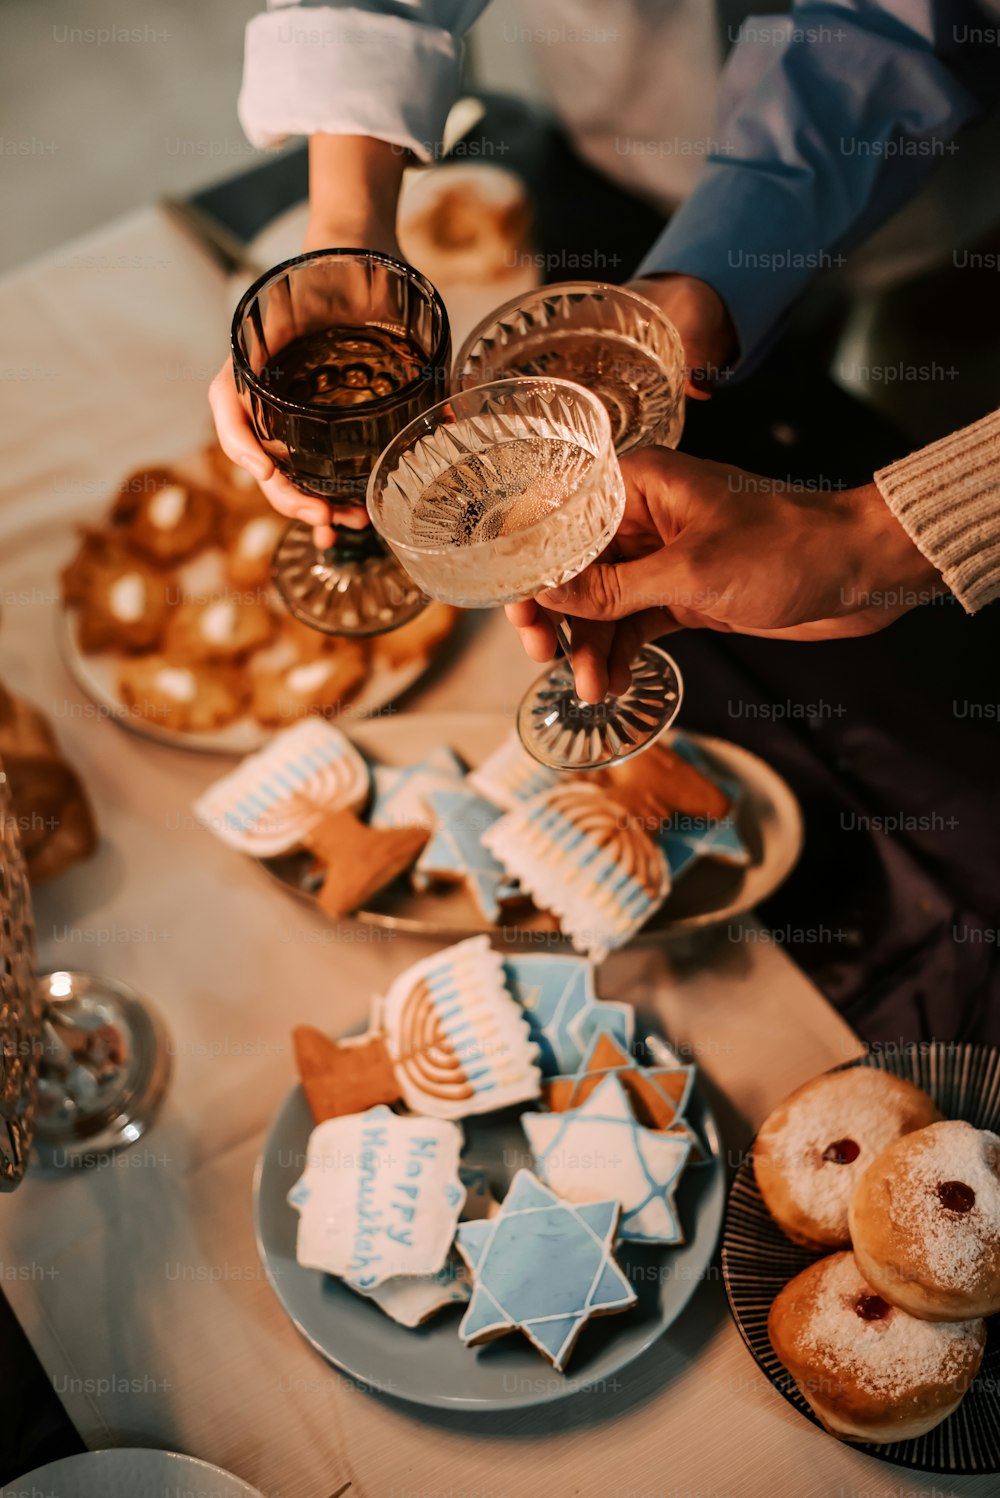 a table topped with plates of cookies and pastries